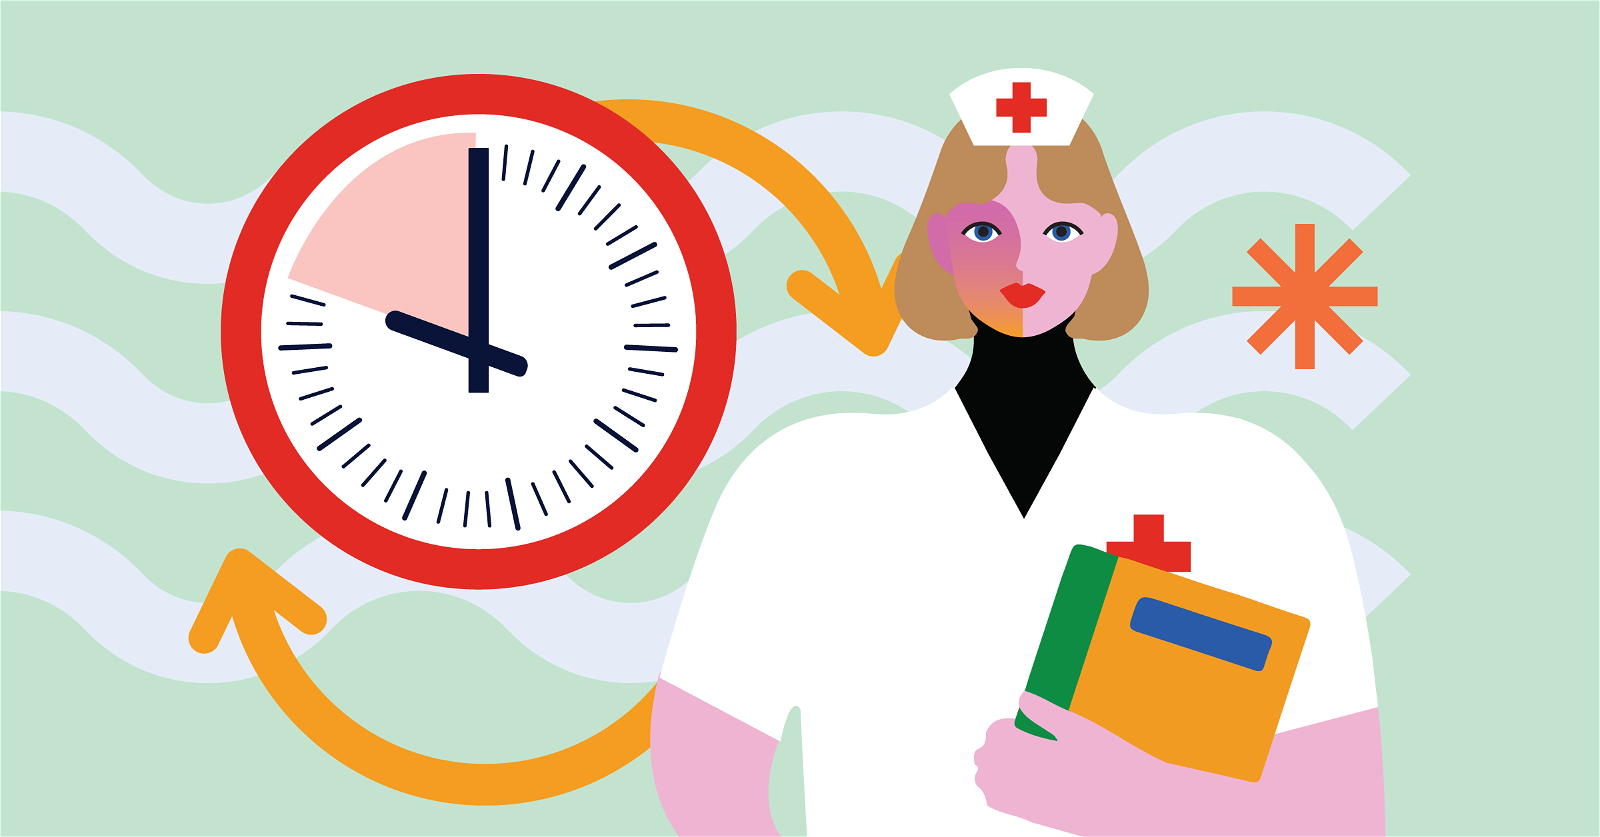 Illustration of a nurse holding a book, standing next to a large clock with arrows indicating the passage of time.